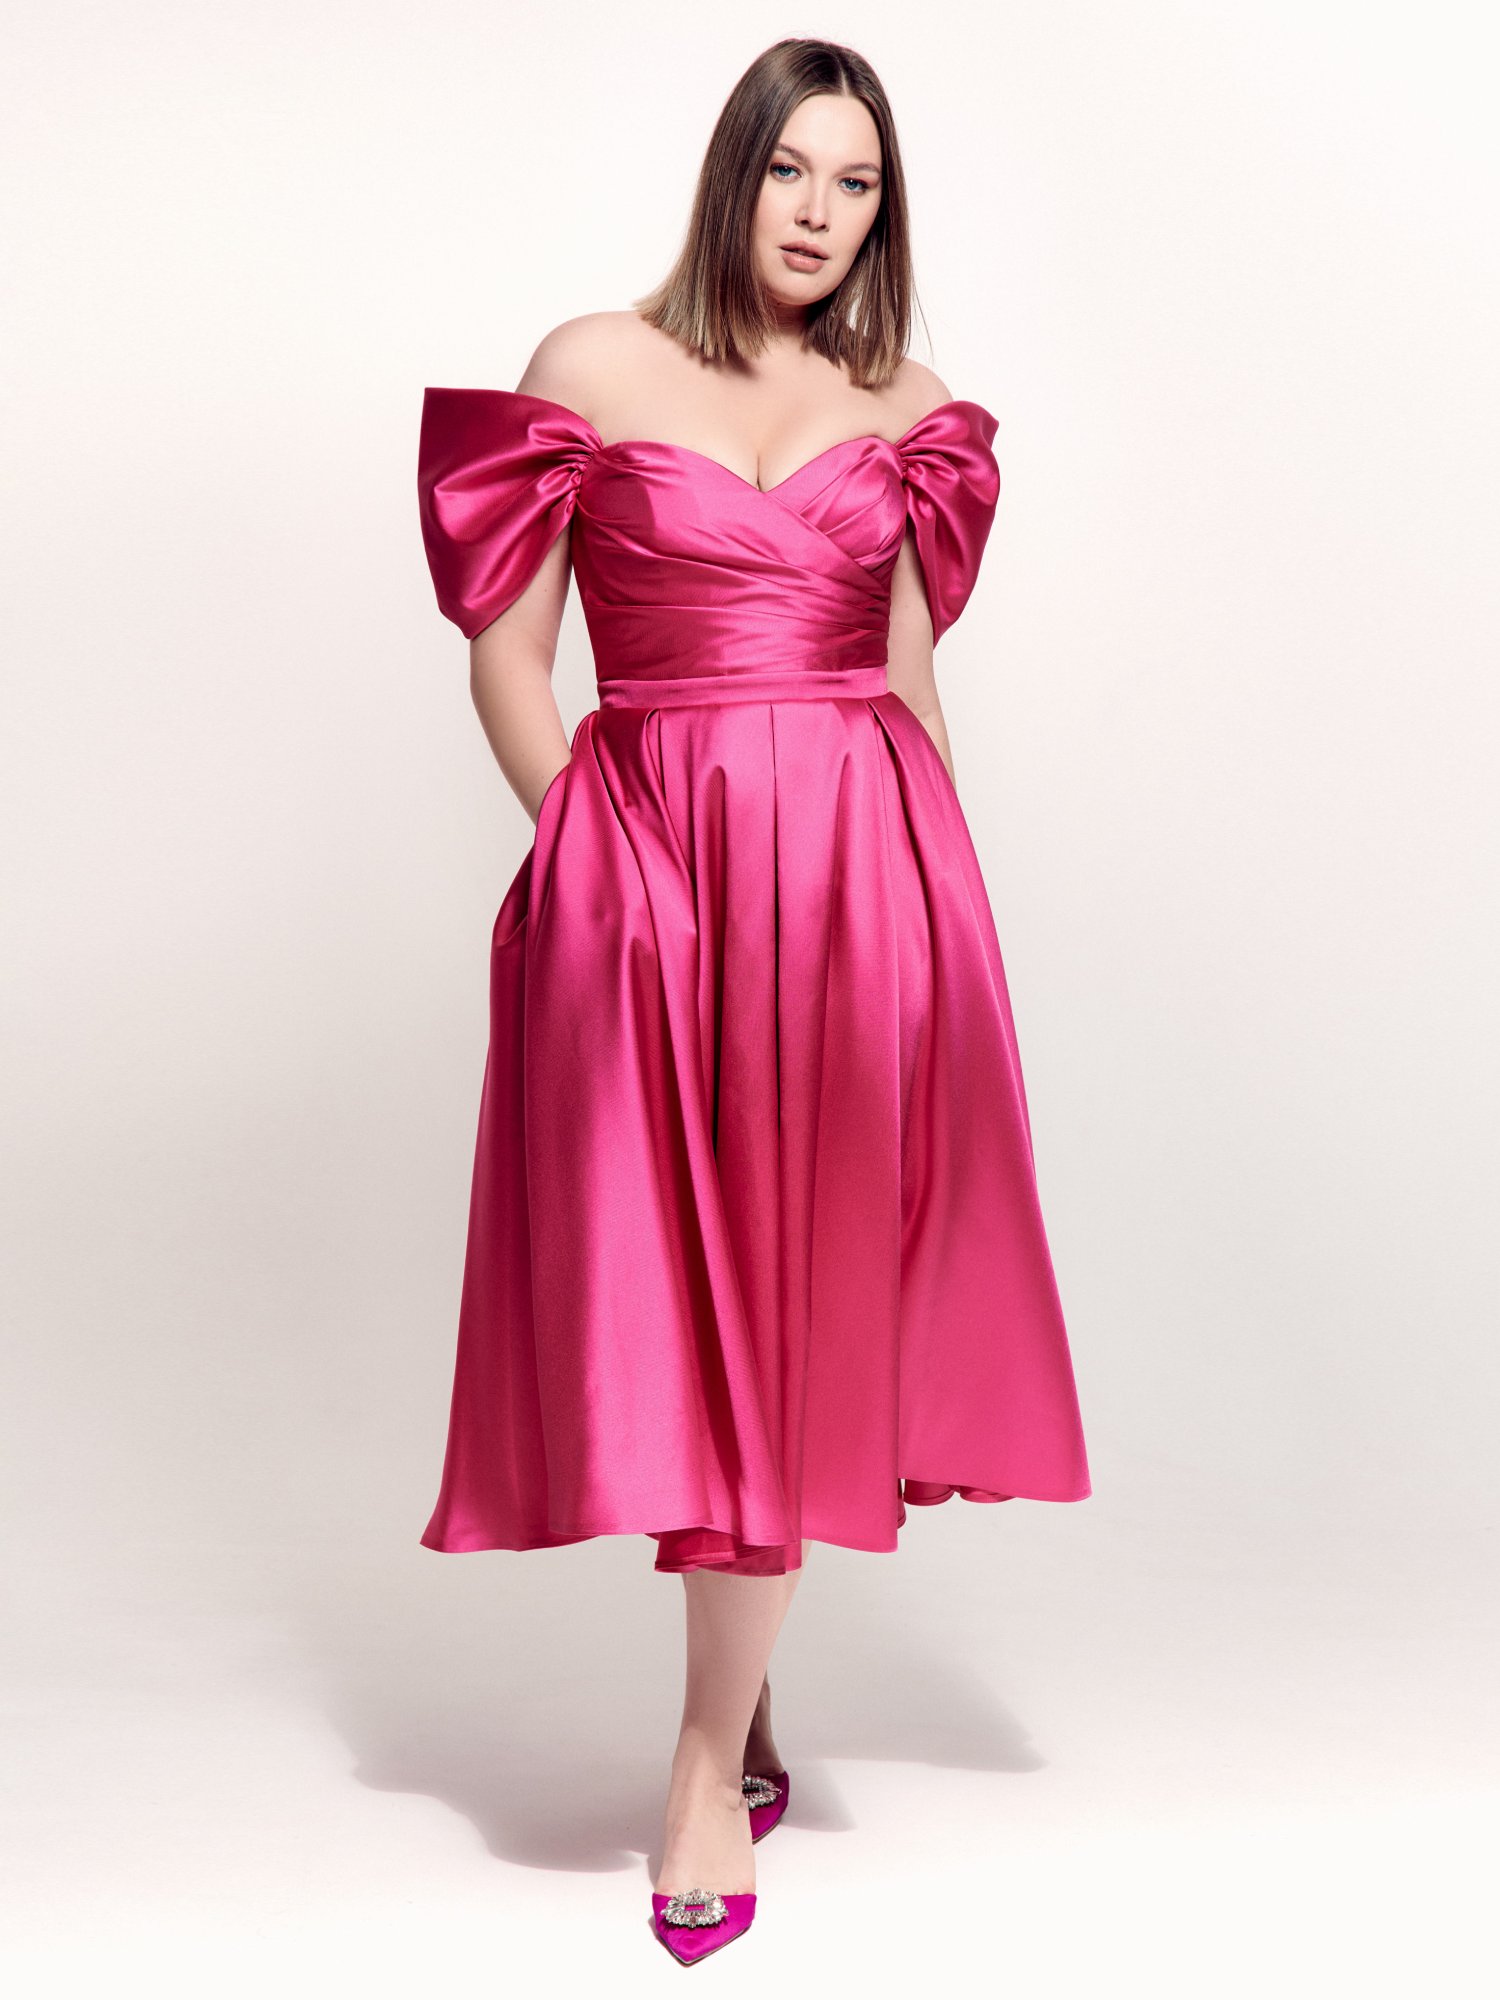 Plus size A-line dress with off-the-shoulder straps